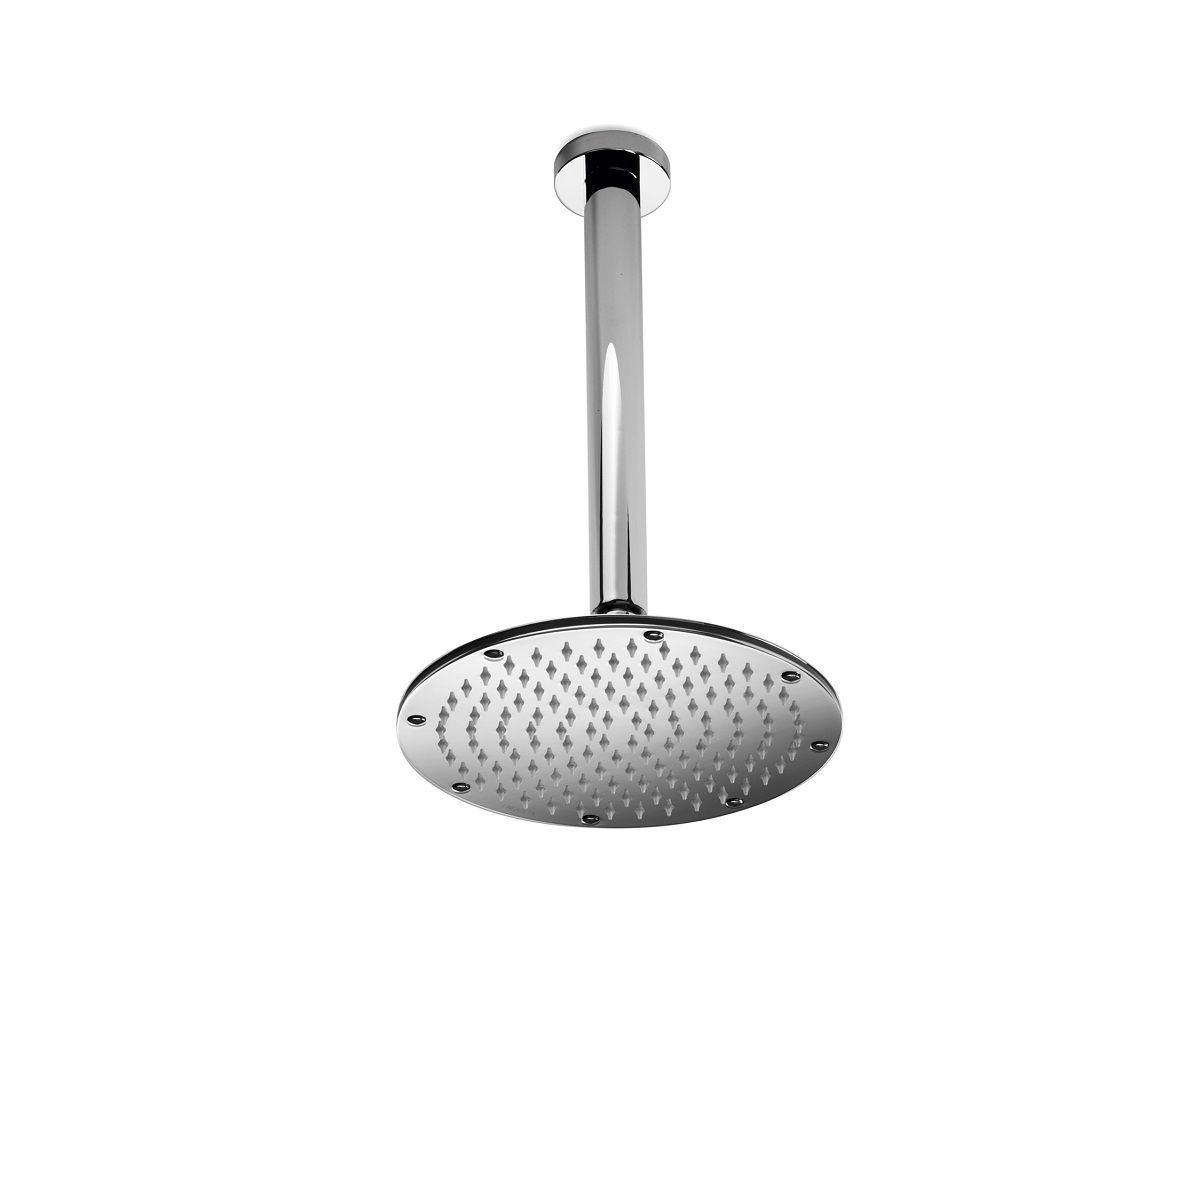 Rain Style Shower Heads are Elegant and Beautiful